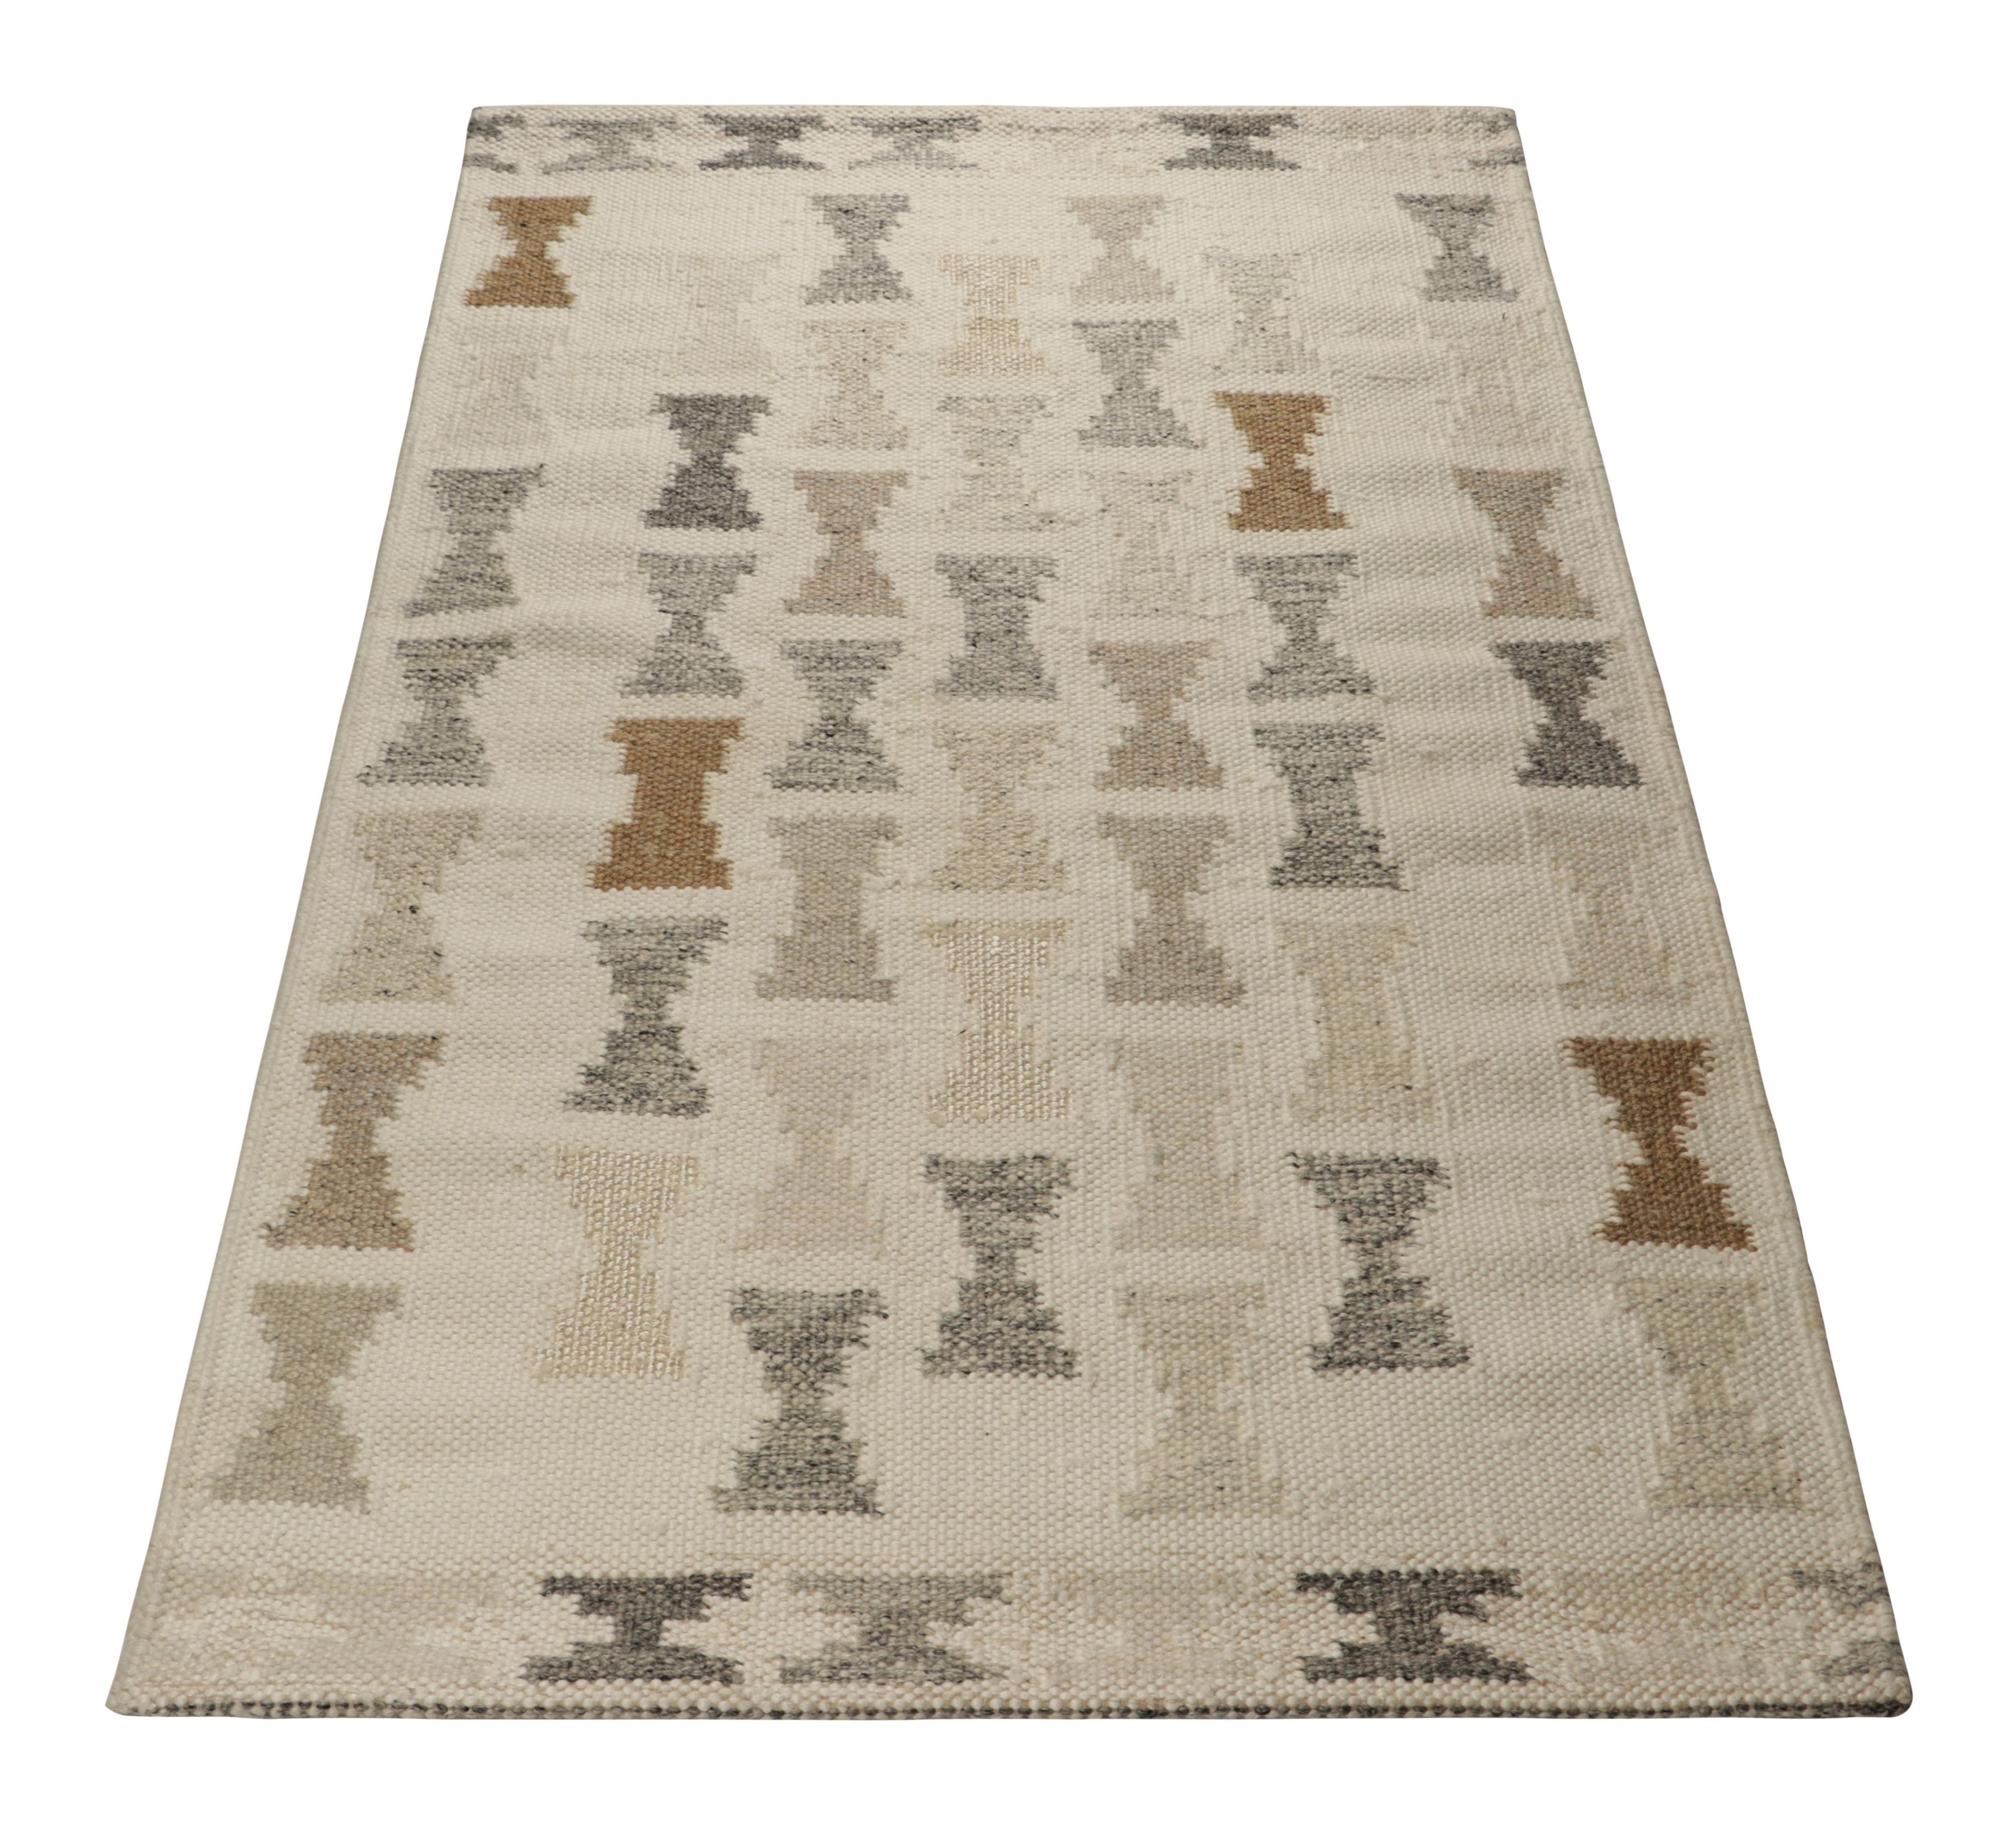 Indian Rug & Kilim’s Scandinavian Style Rug in Gray and Blue, with Hourglass Patterns For Sale